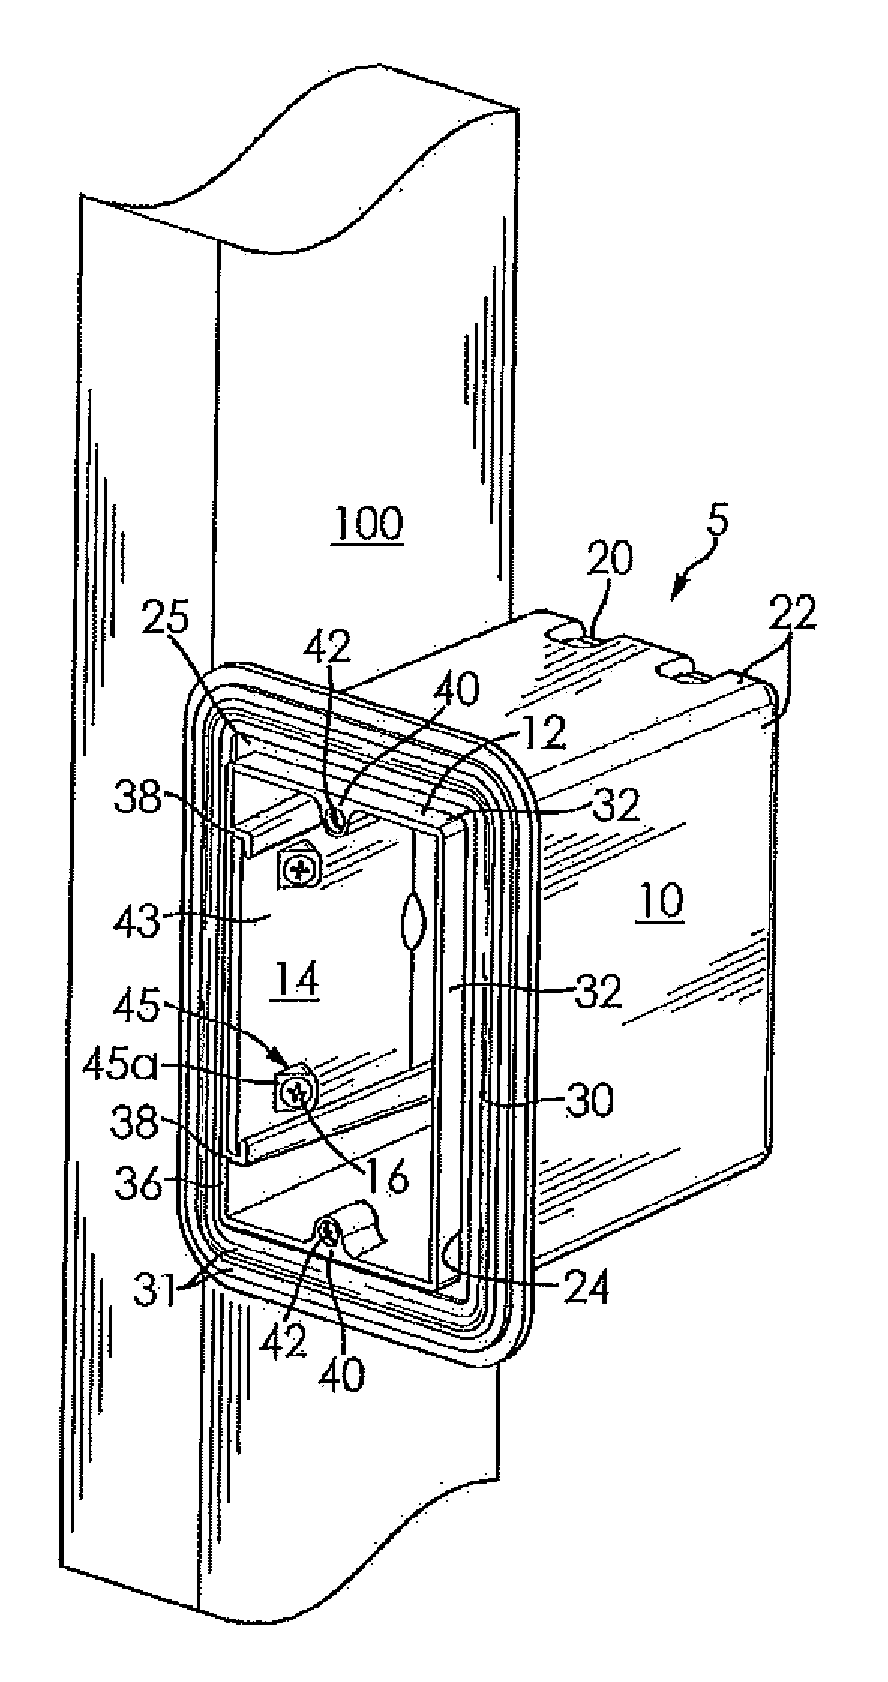 Electrical box with adjustable sleeve